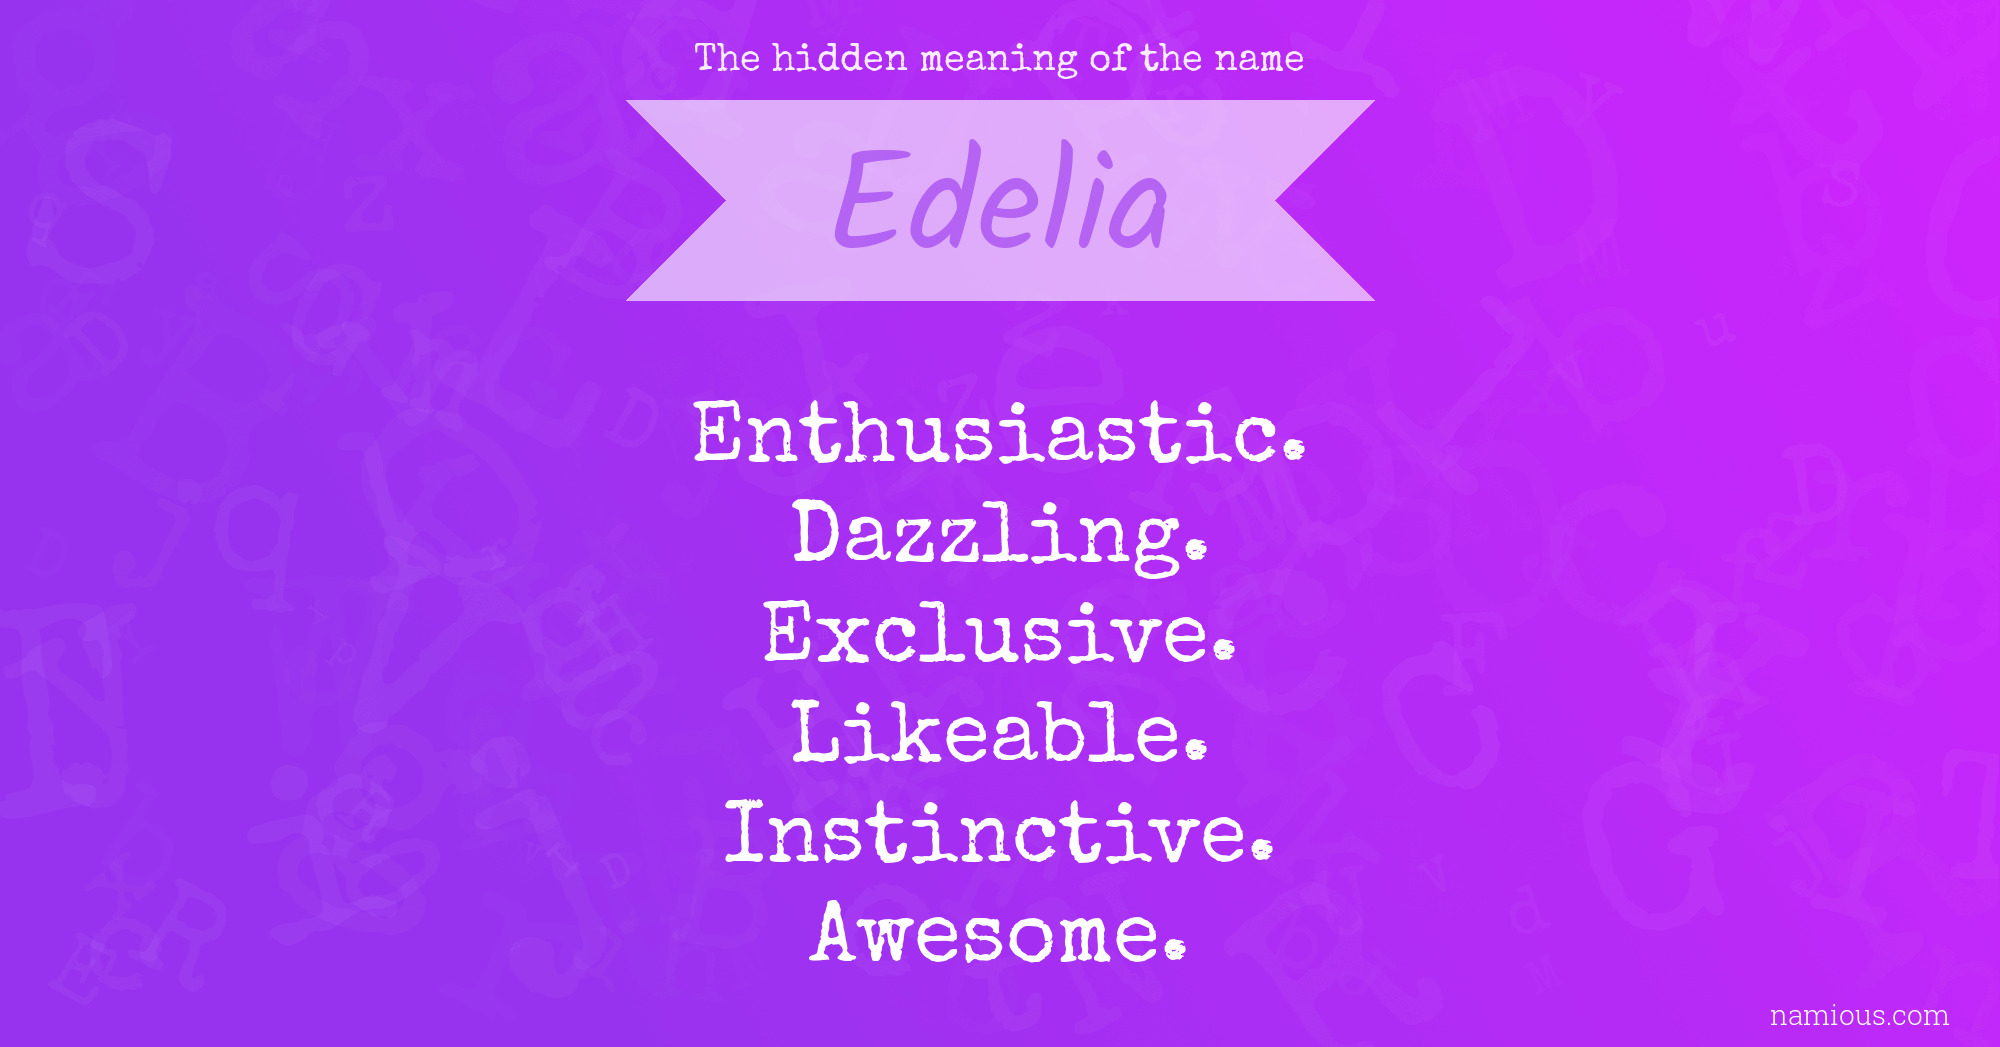 The hidden meaning of the name Edelia